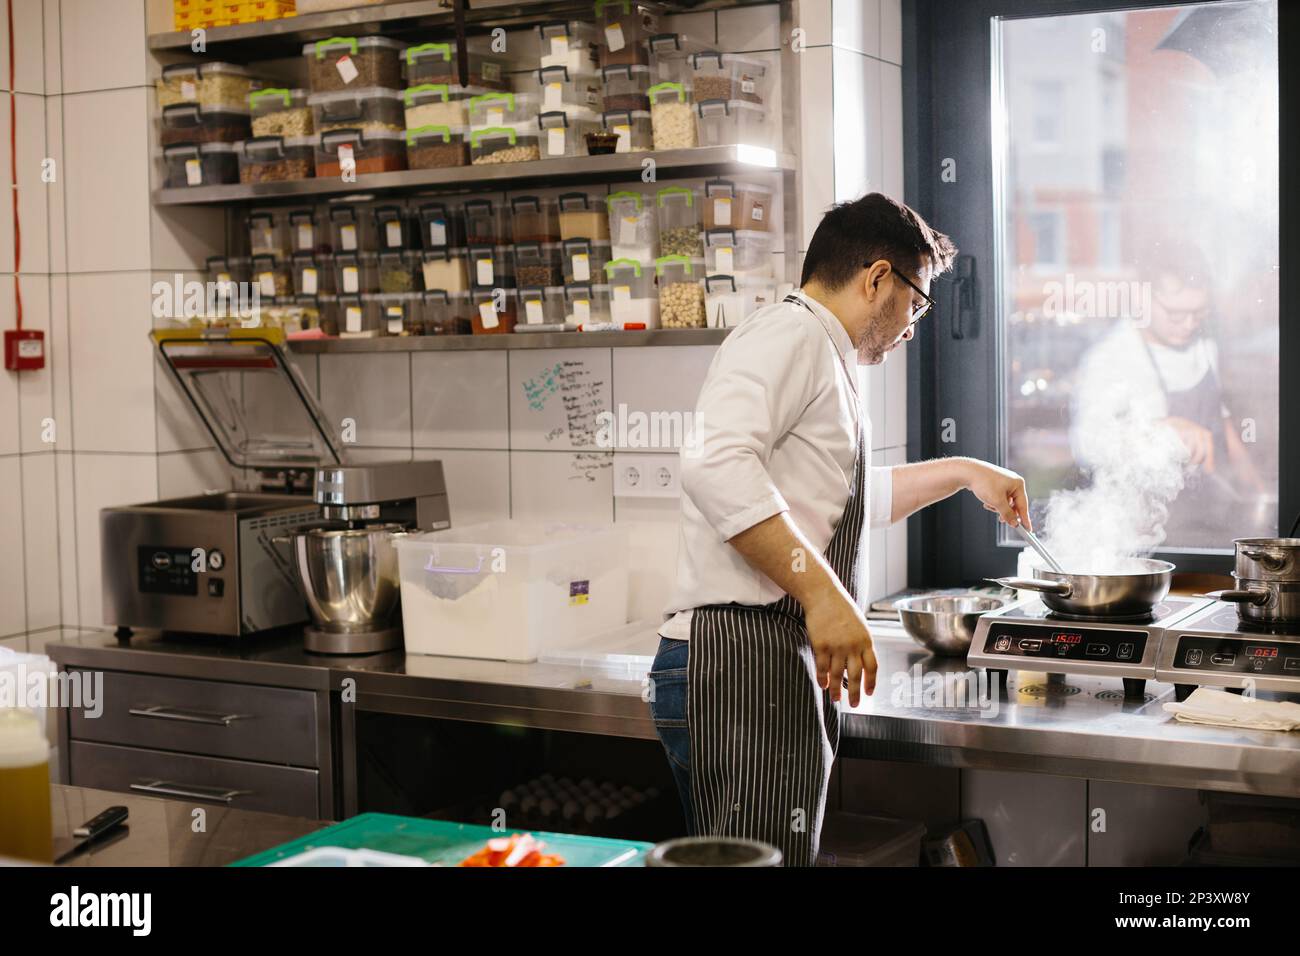 Сooking food, profession and people concept - male chef cook with frying pan at restaurant kitchen. Stock Photo